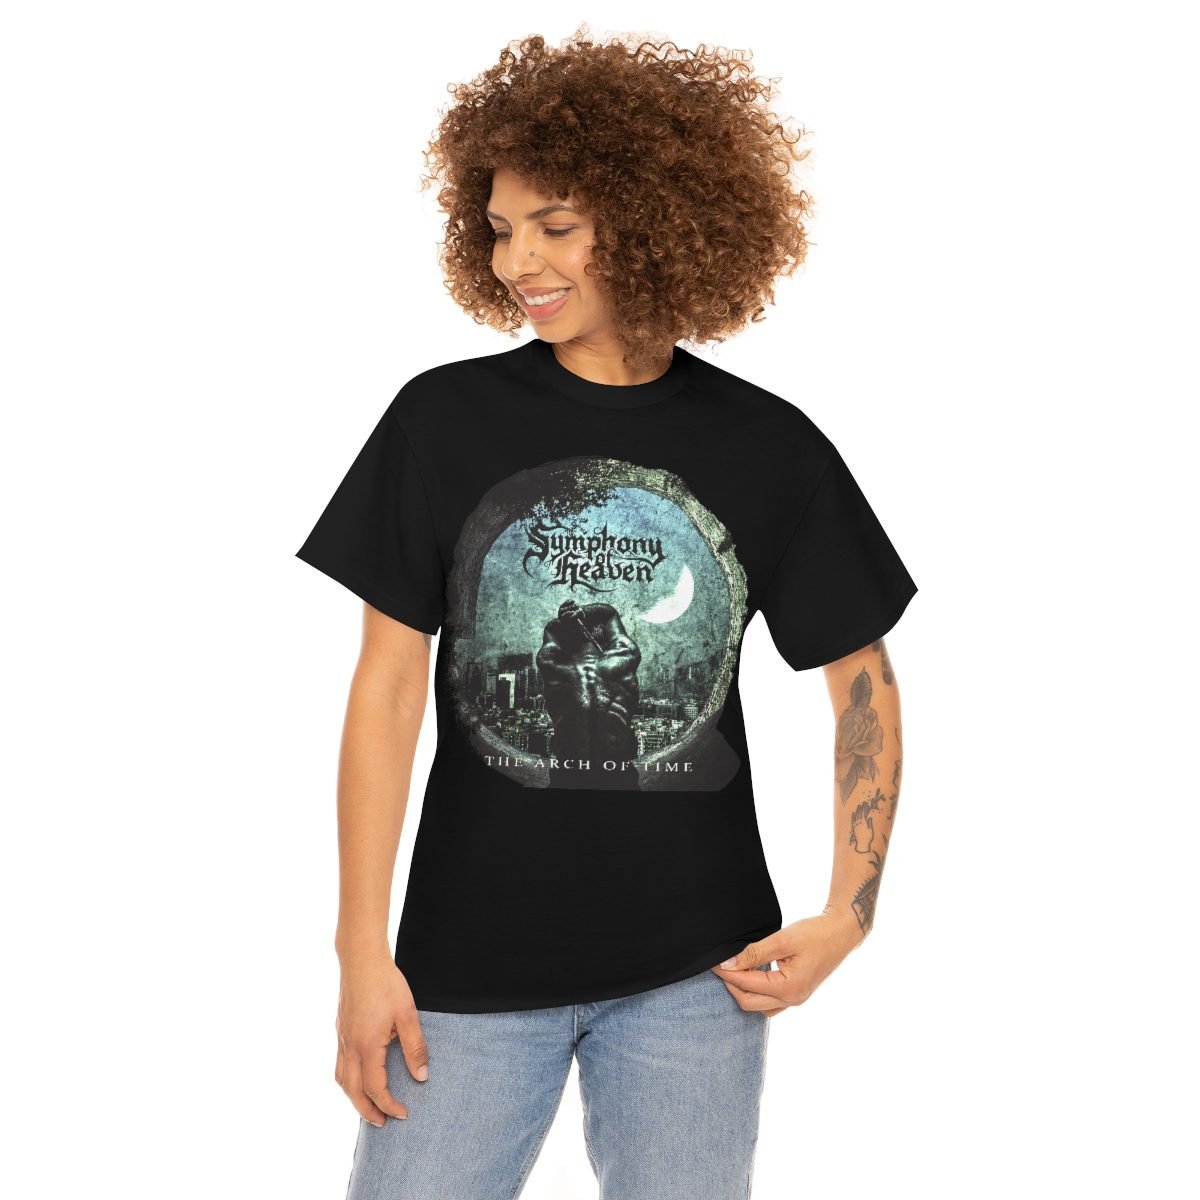 Symphony of Heaven – The Arch of Time Short Sleeve Tshirt (5000)